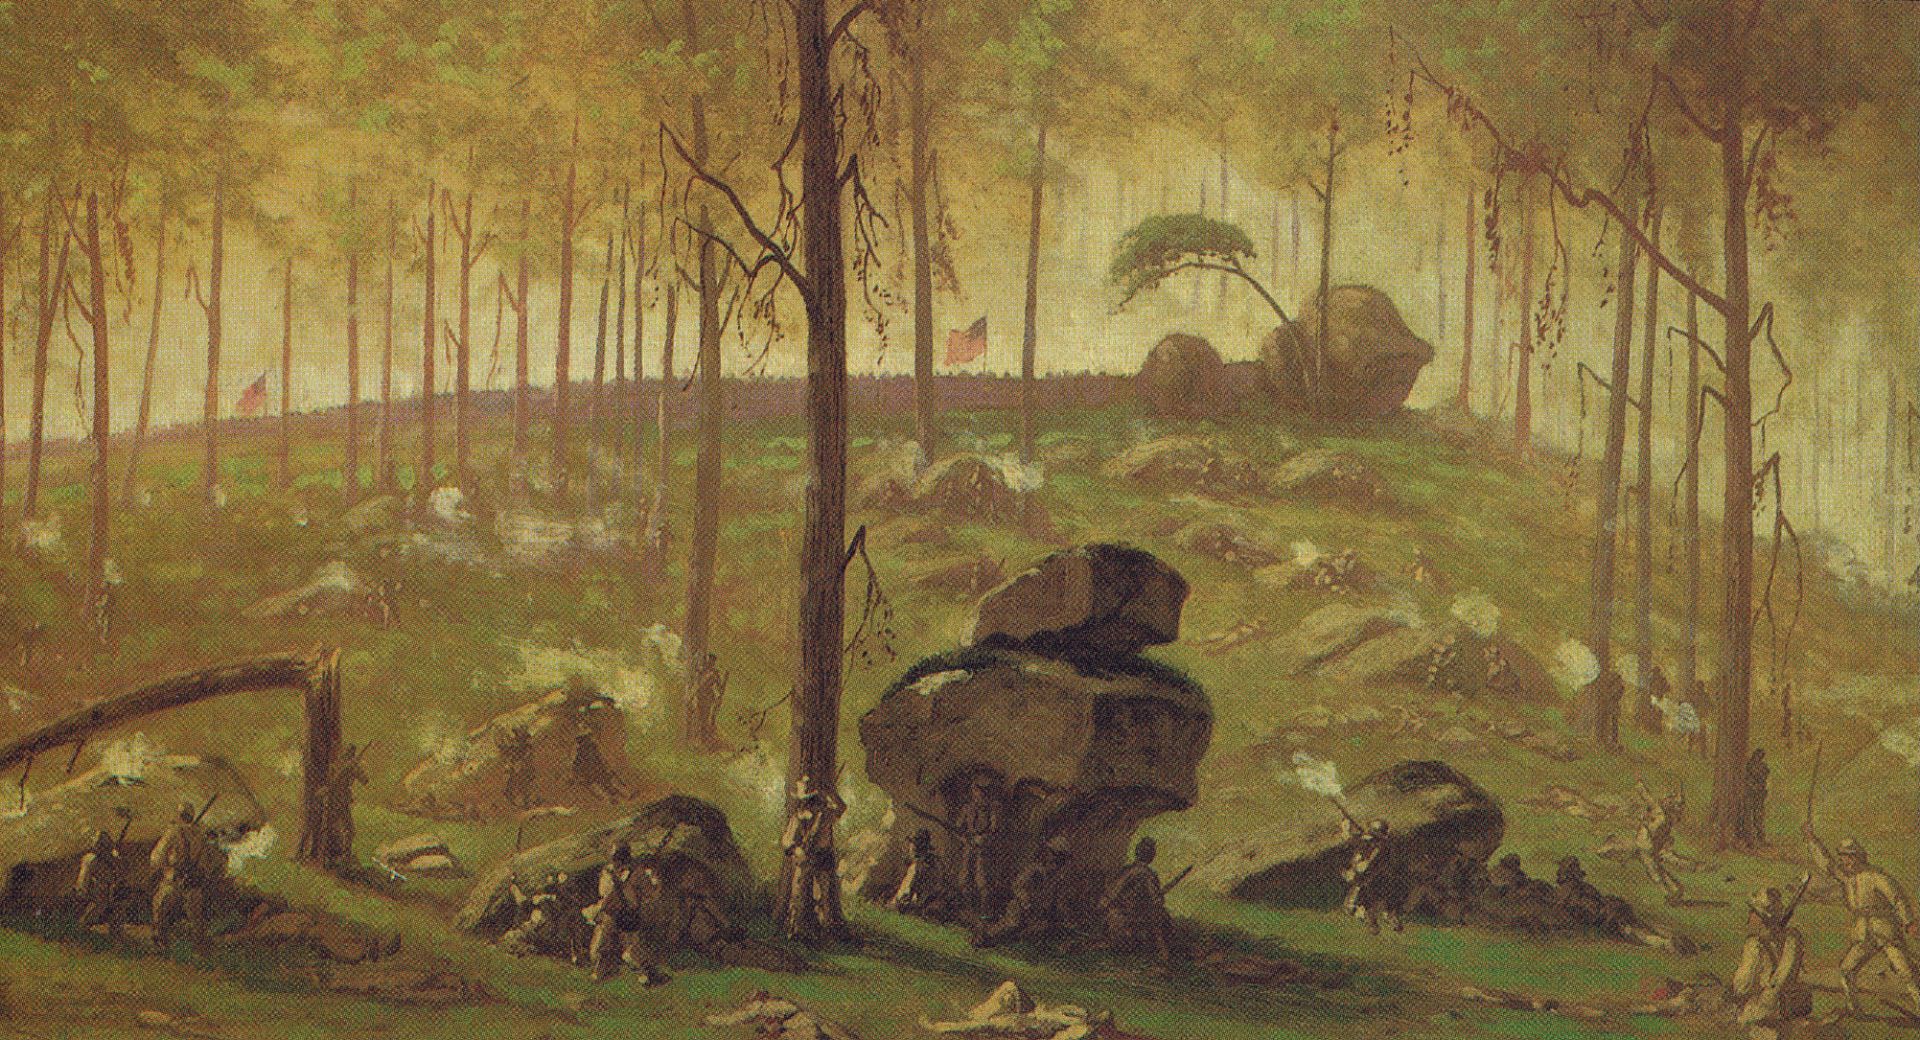 it is a painting of a forest with trees and rocks .